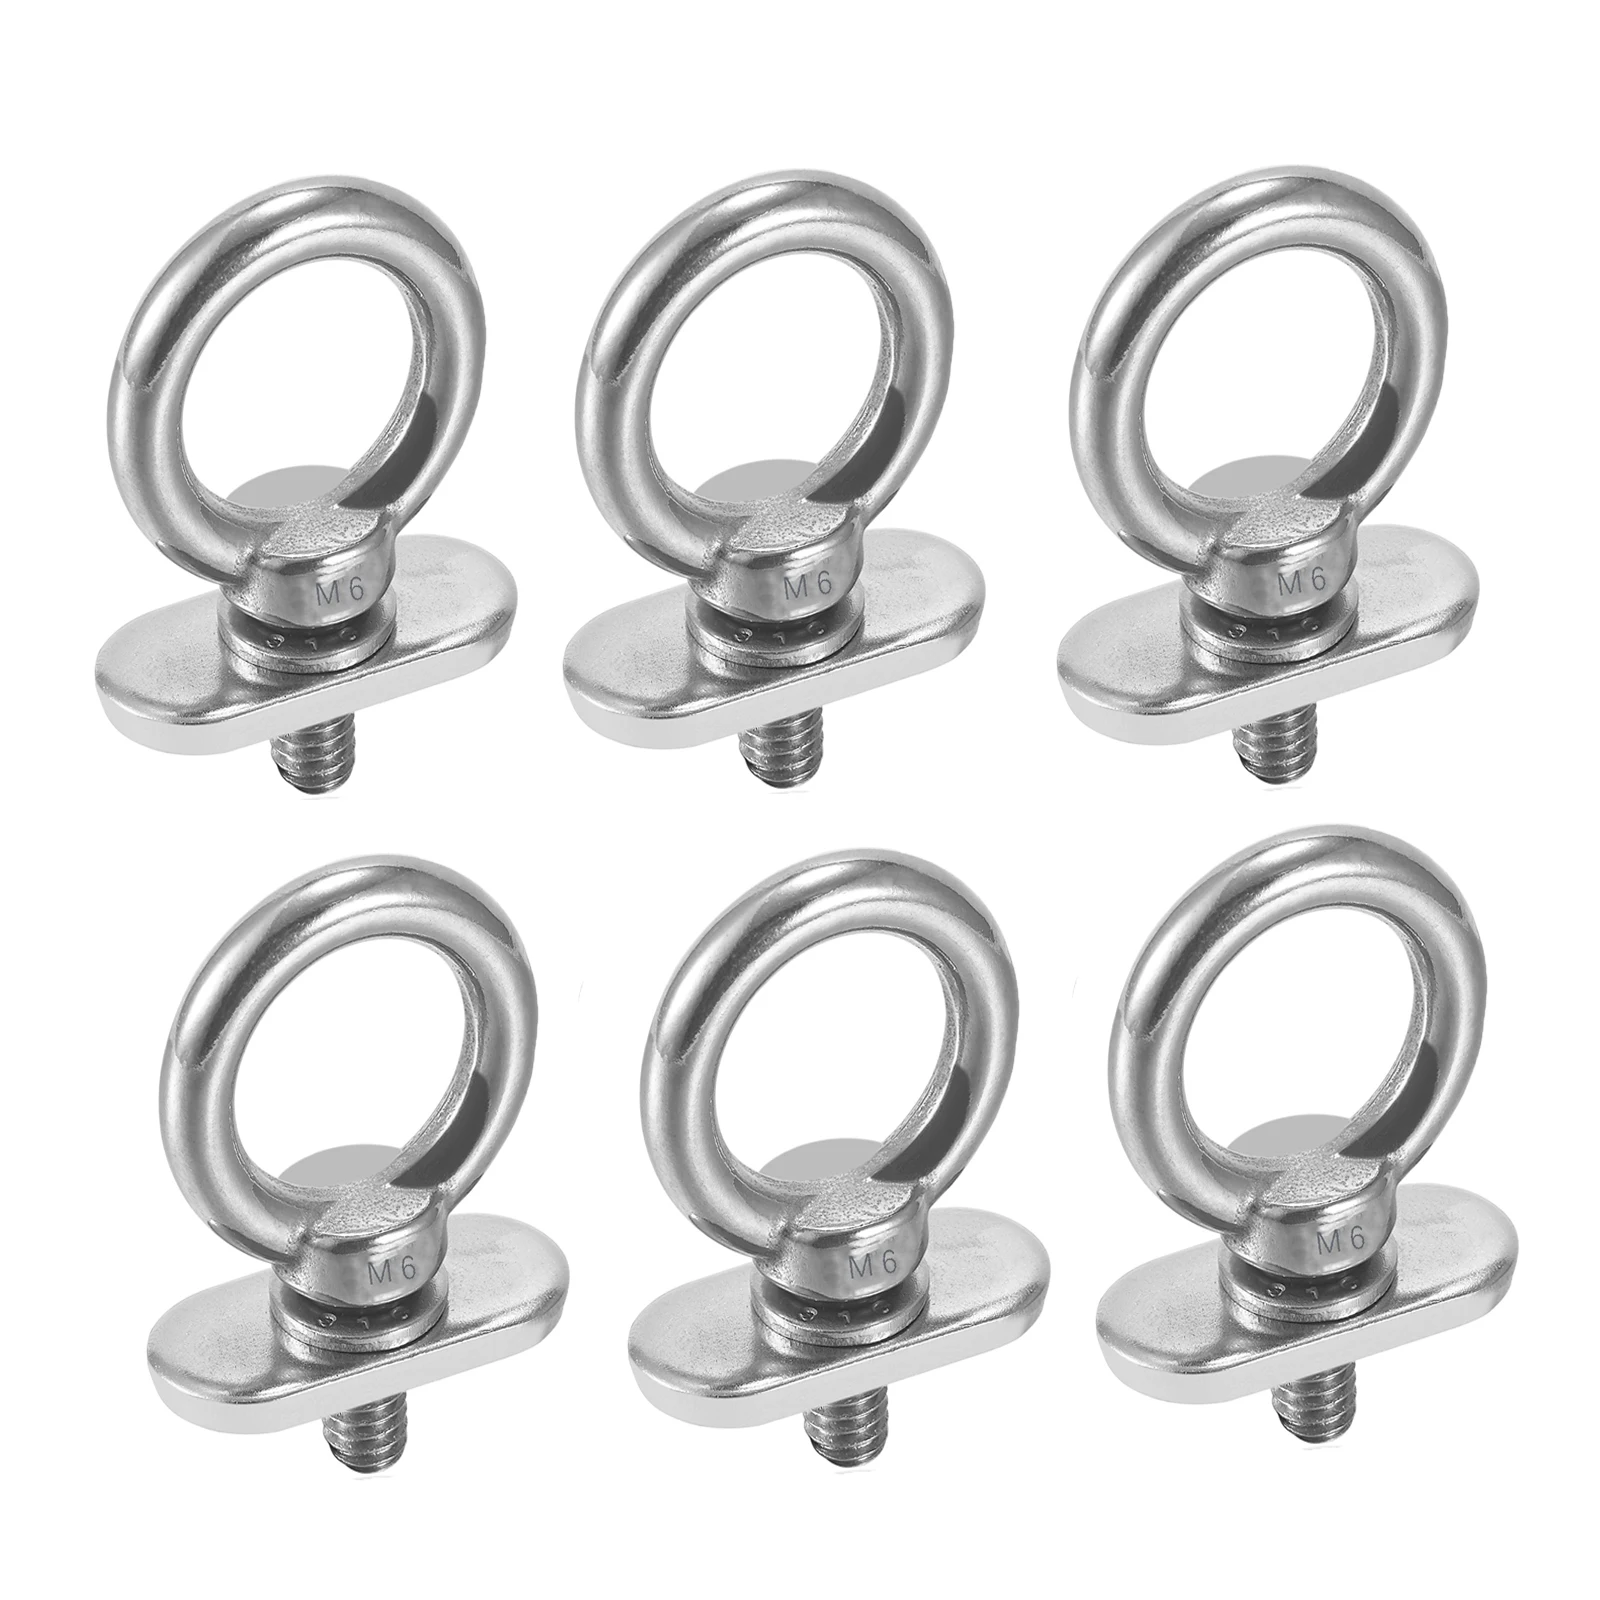 Track Mount Tie Down Eyelets, M6 Bolt, 316 Stainless Steel，Kayak Track Accessories (6 Packs)